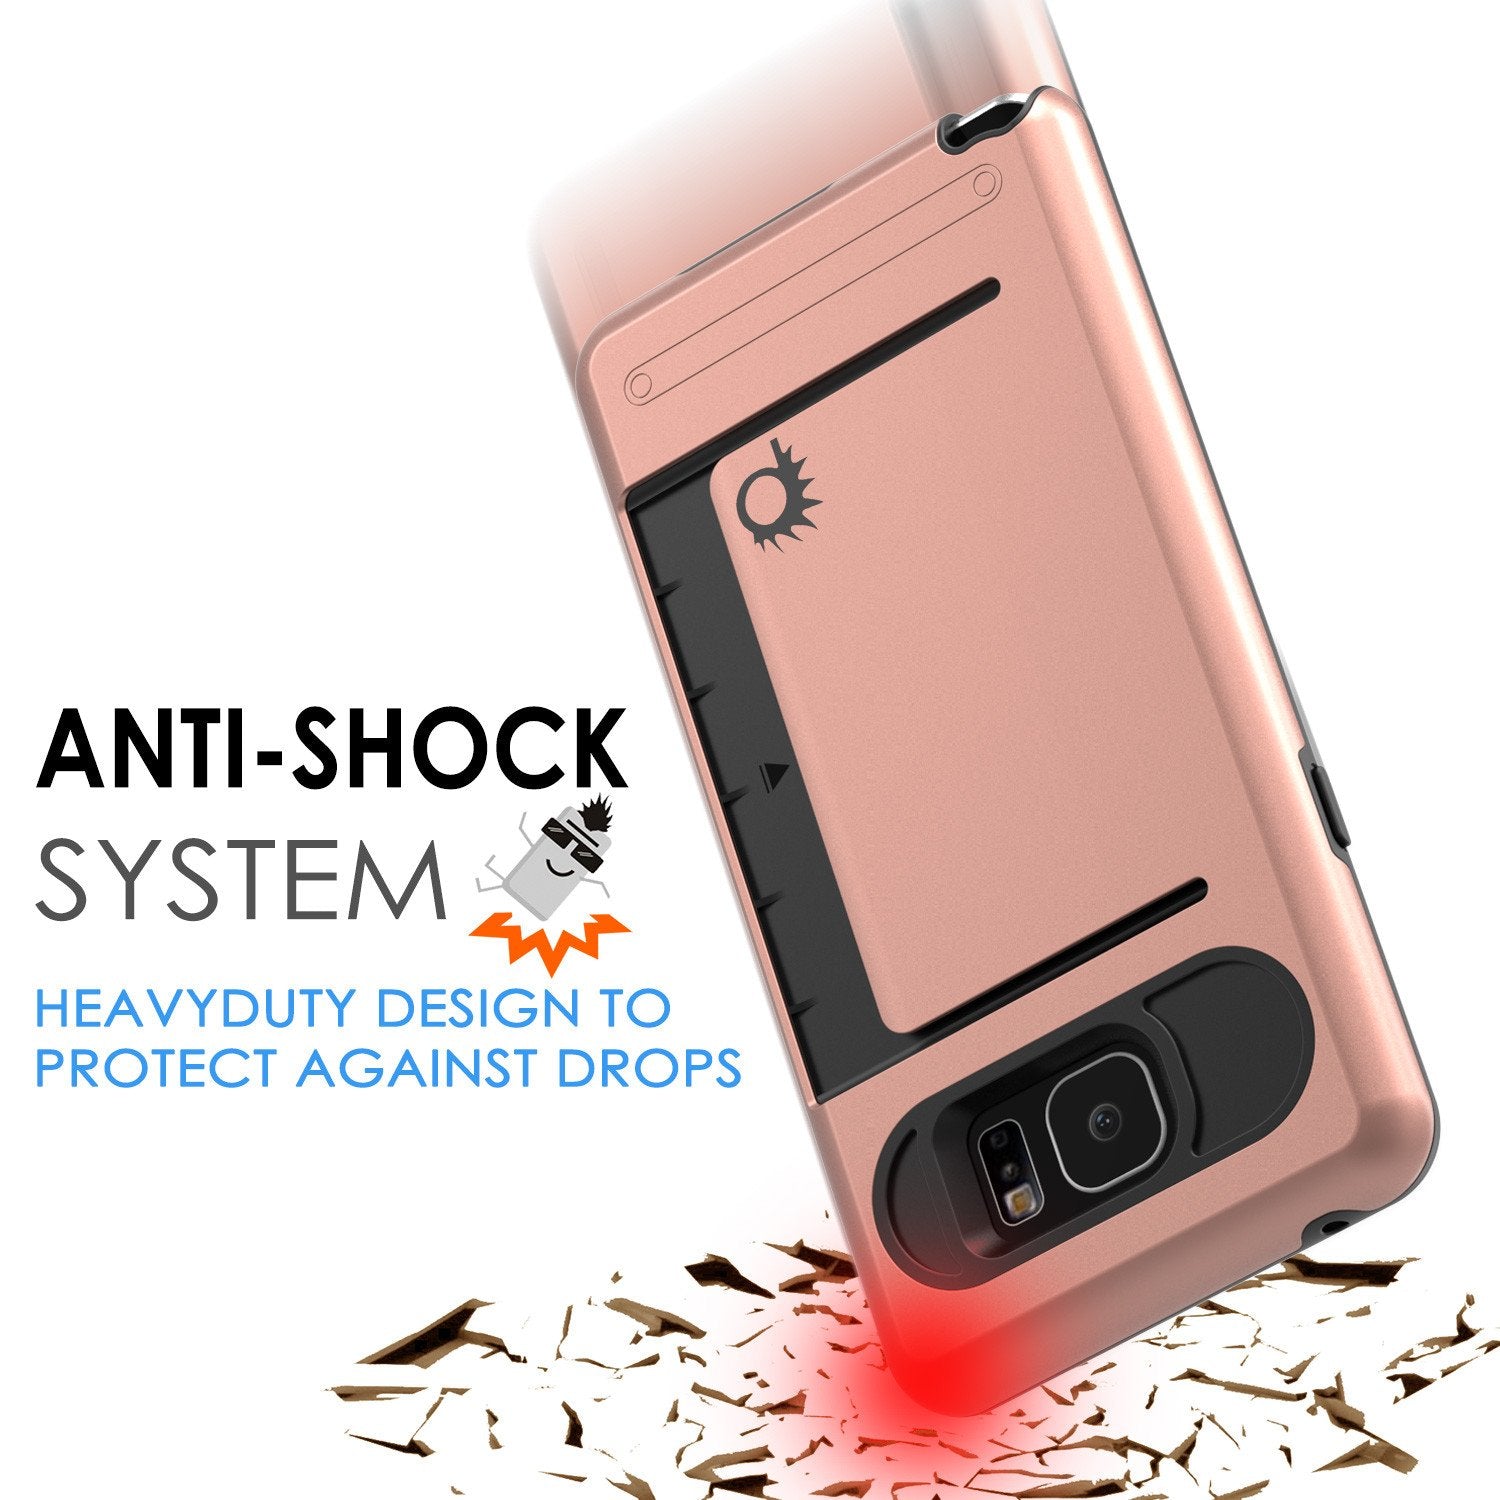 Galaxy Note 5 Case PunkCase CLUTCH Rose Gold Series Slim Armor Soft Cover Case w/ Tempered Glass